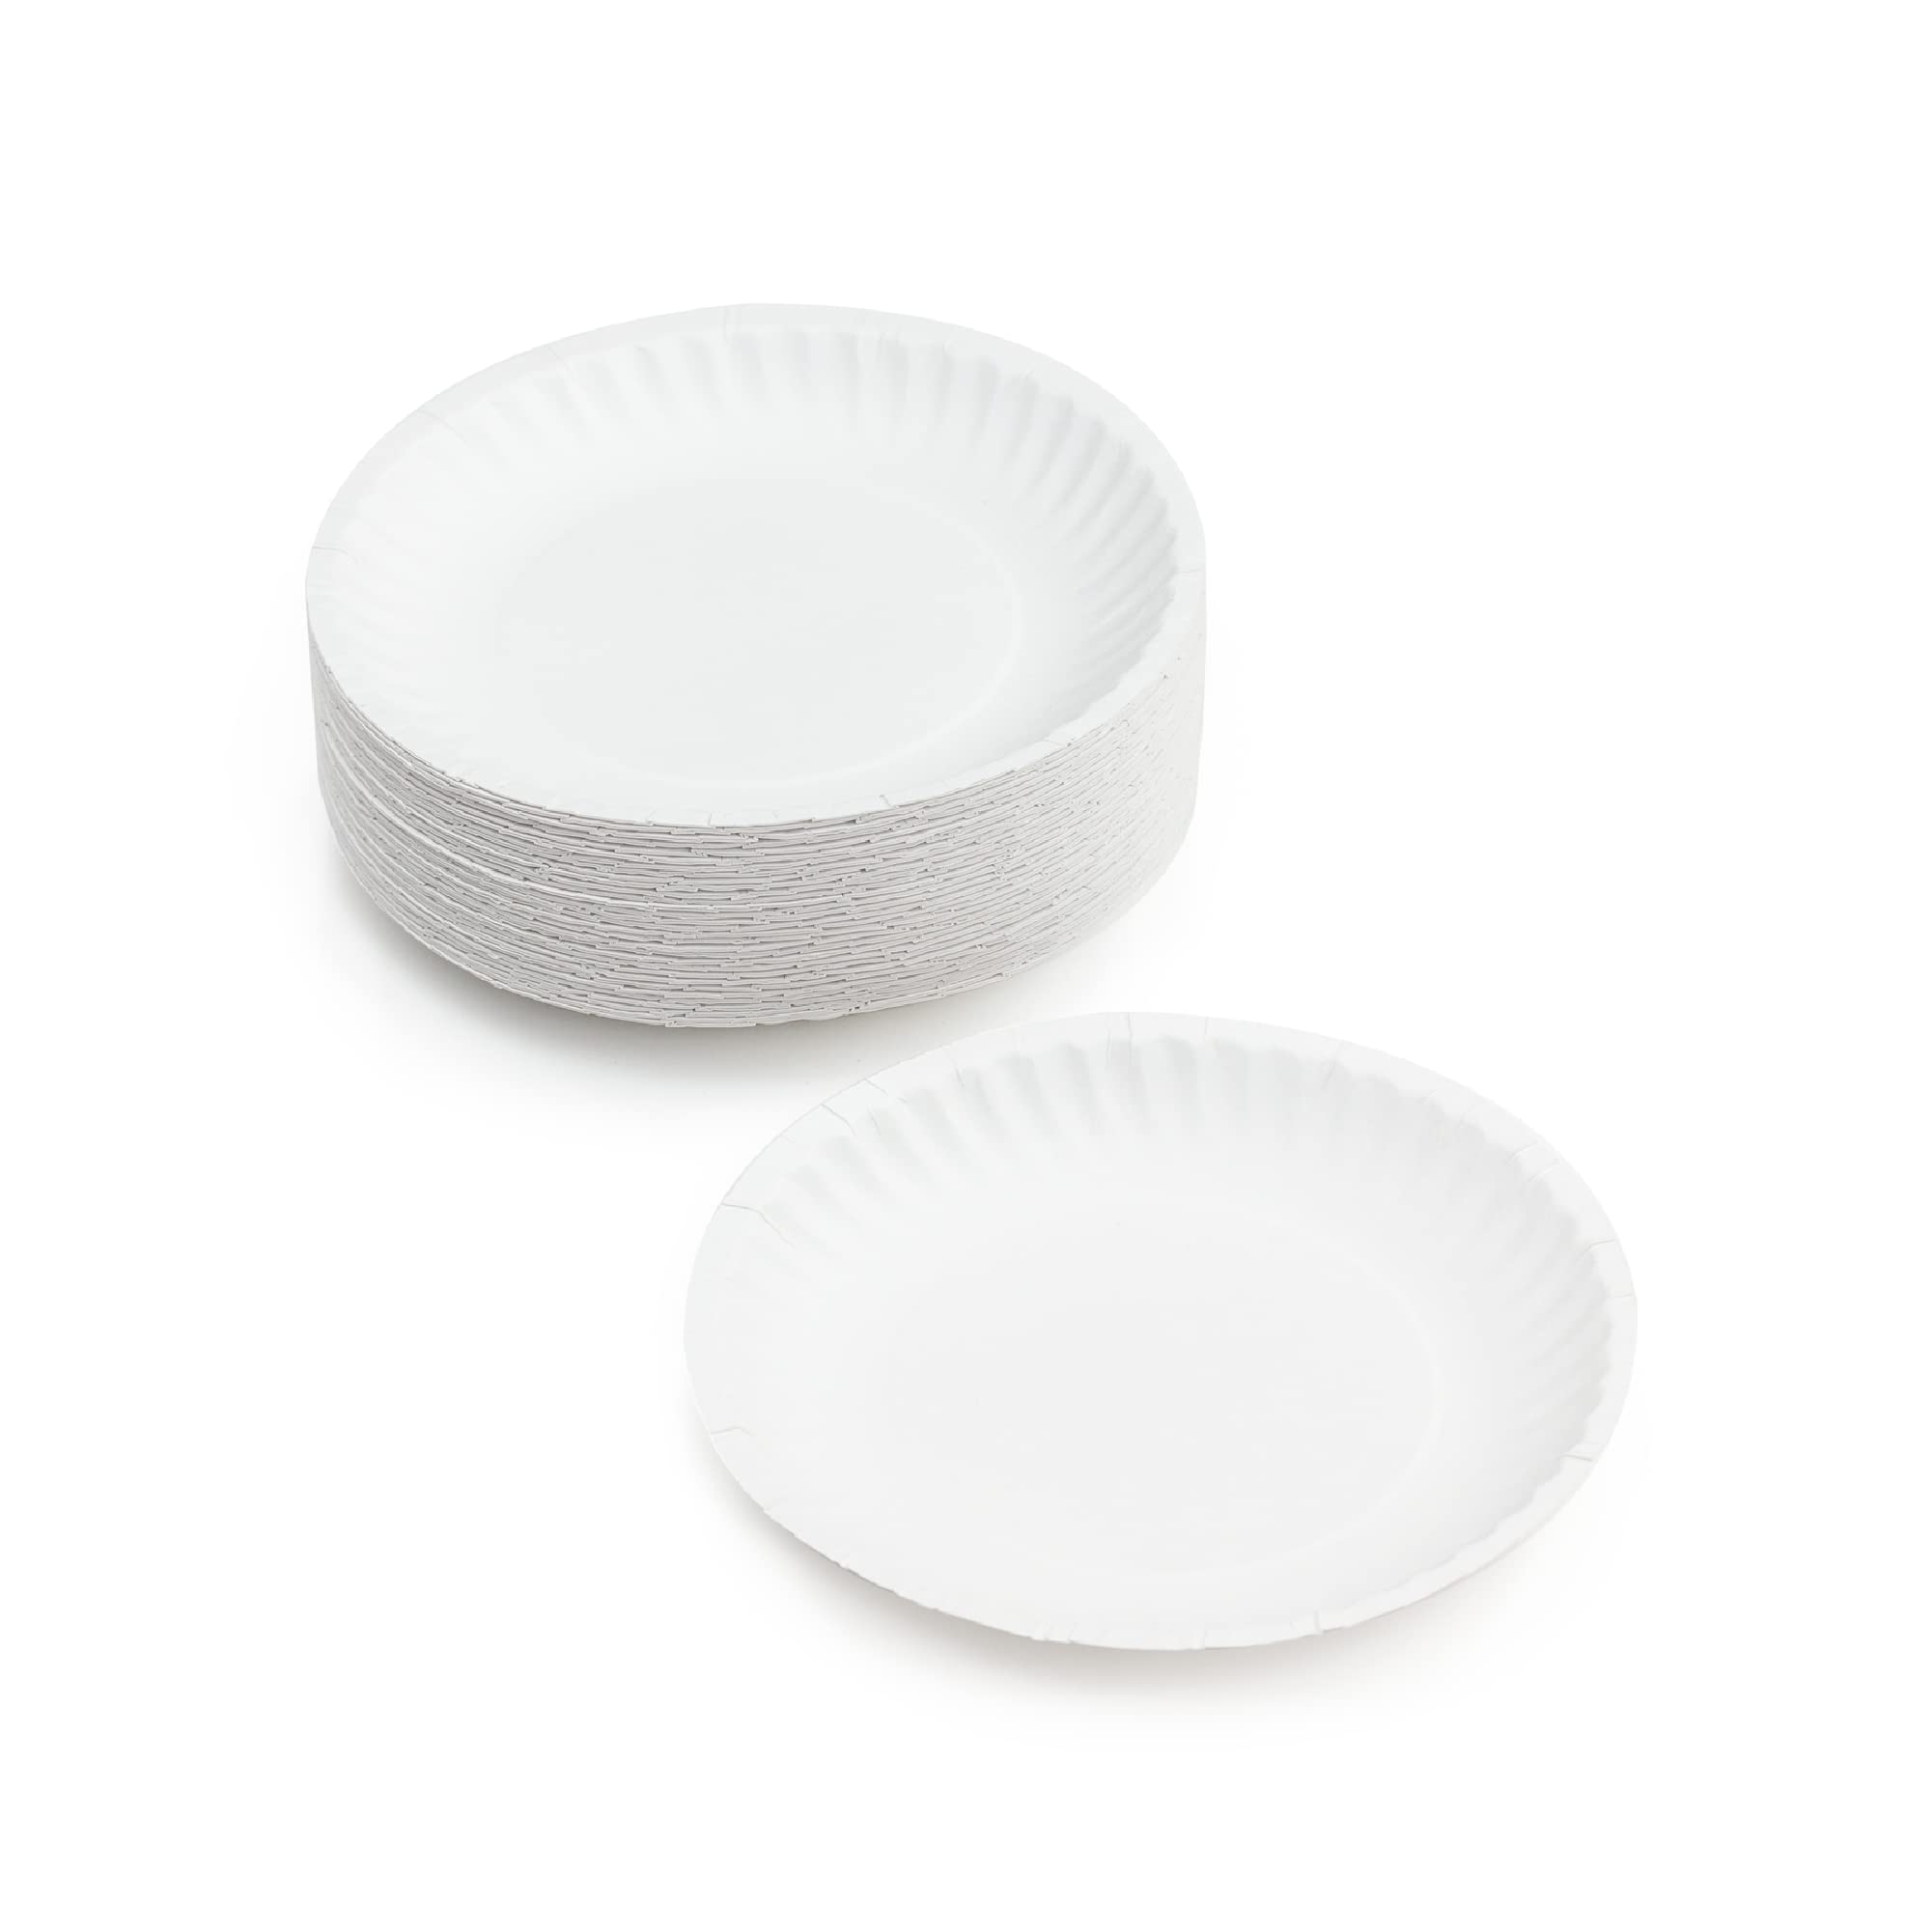 Hygloss Products 6 Uncoated White Paper Plates Bulk, 6 Inch, 1000